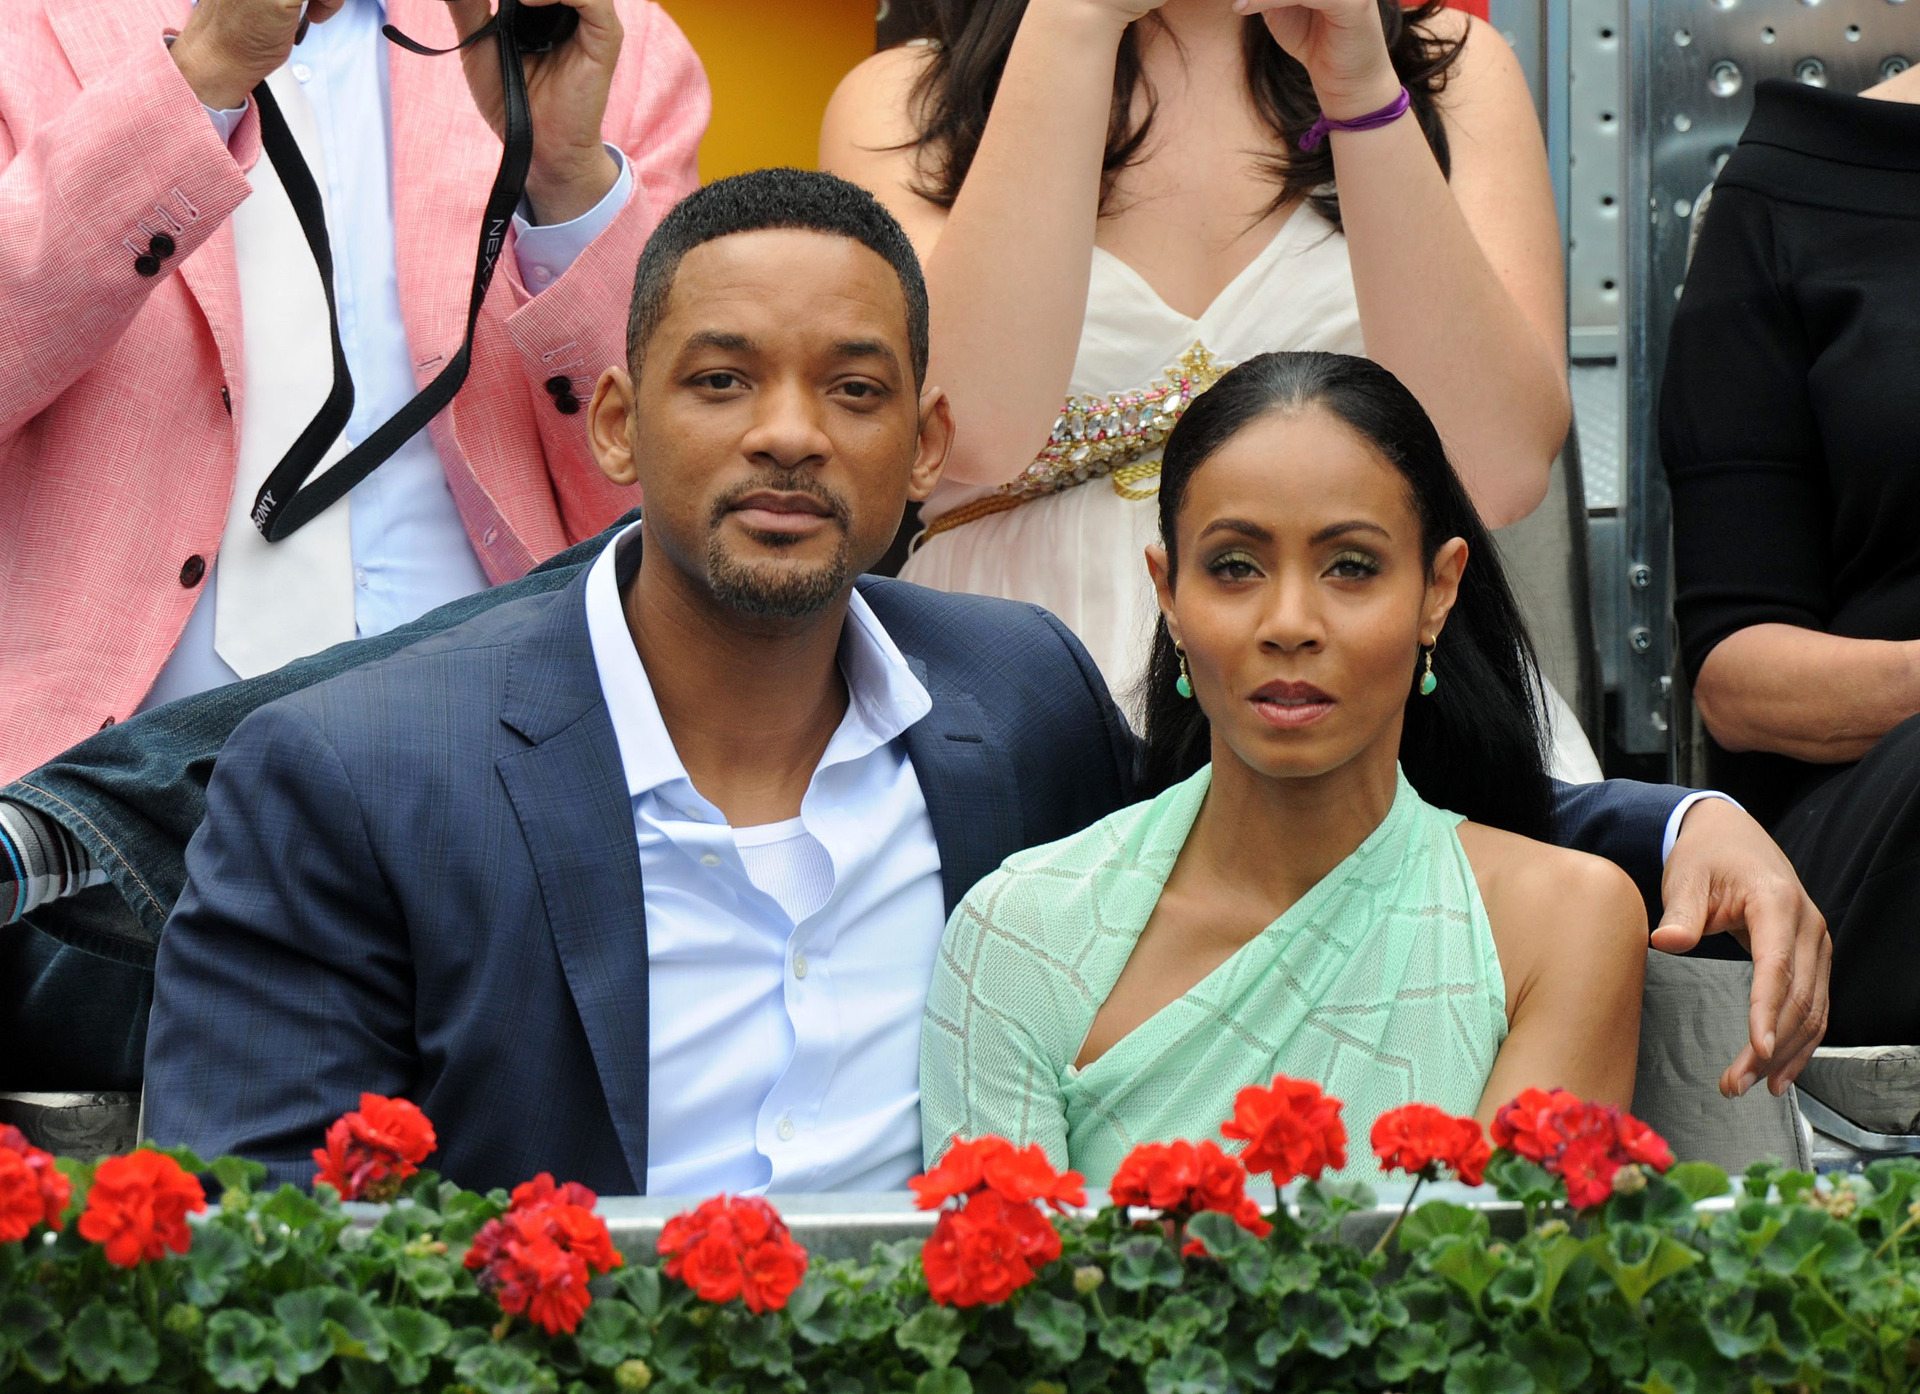 Sex addiction, swinging and role-play Inside Will Smith and Jada Pinkett Smiths kinky marriage